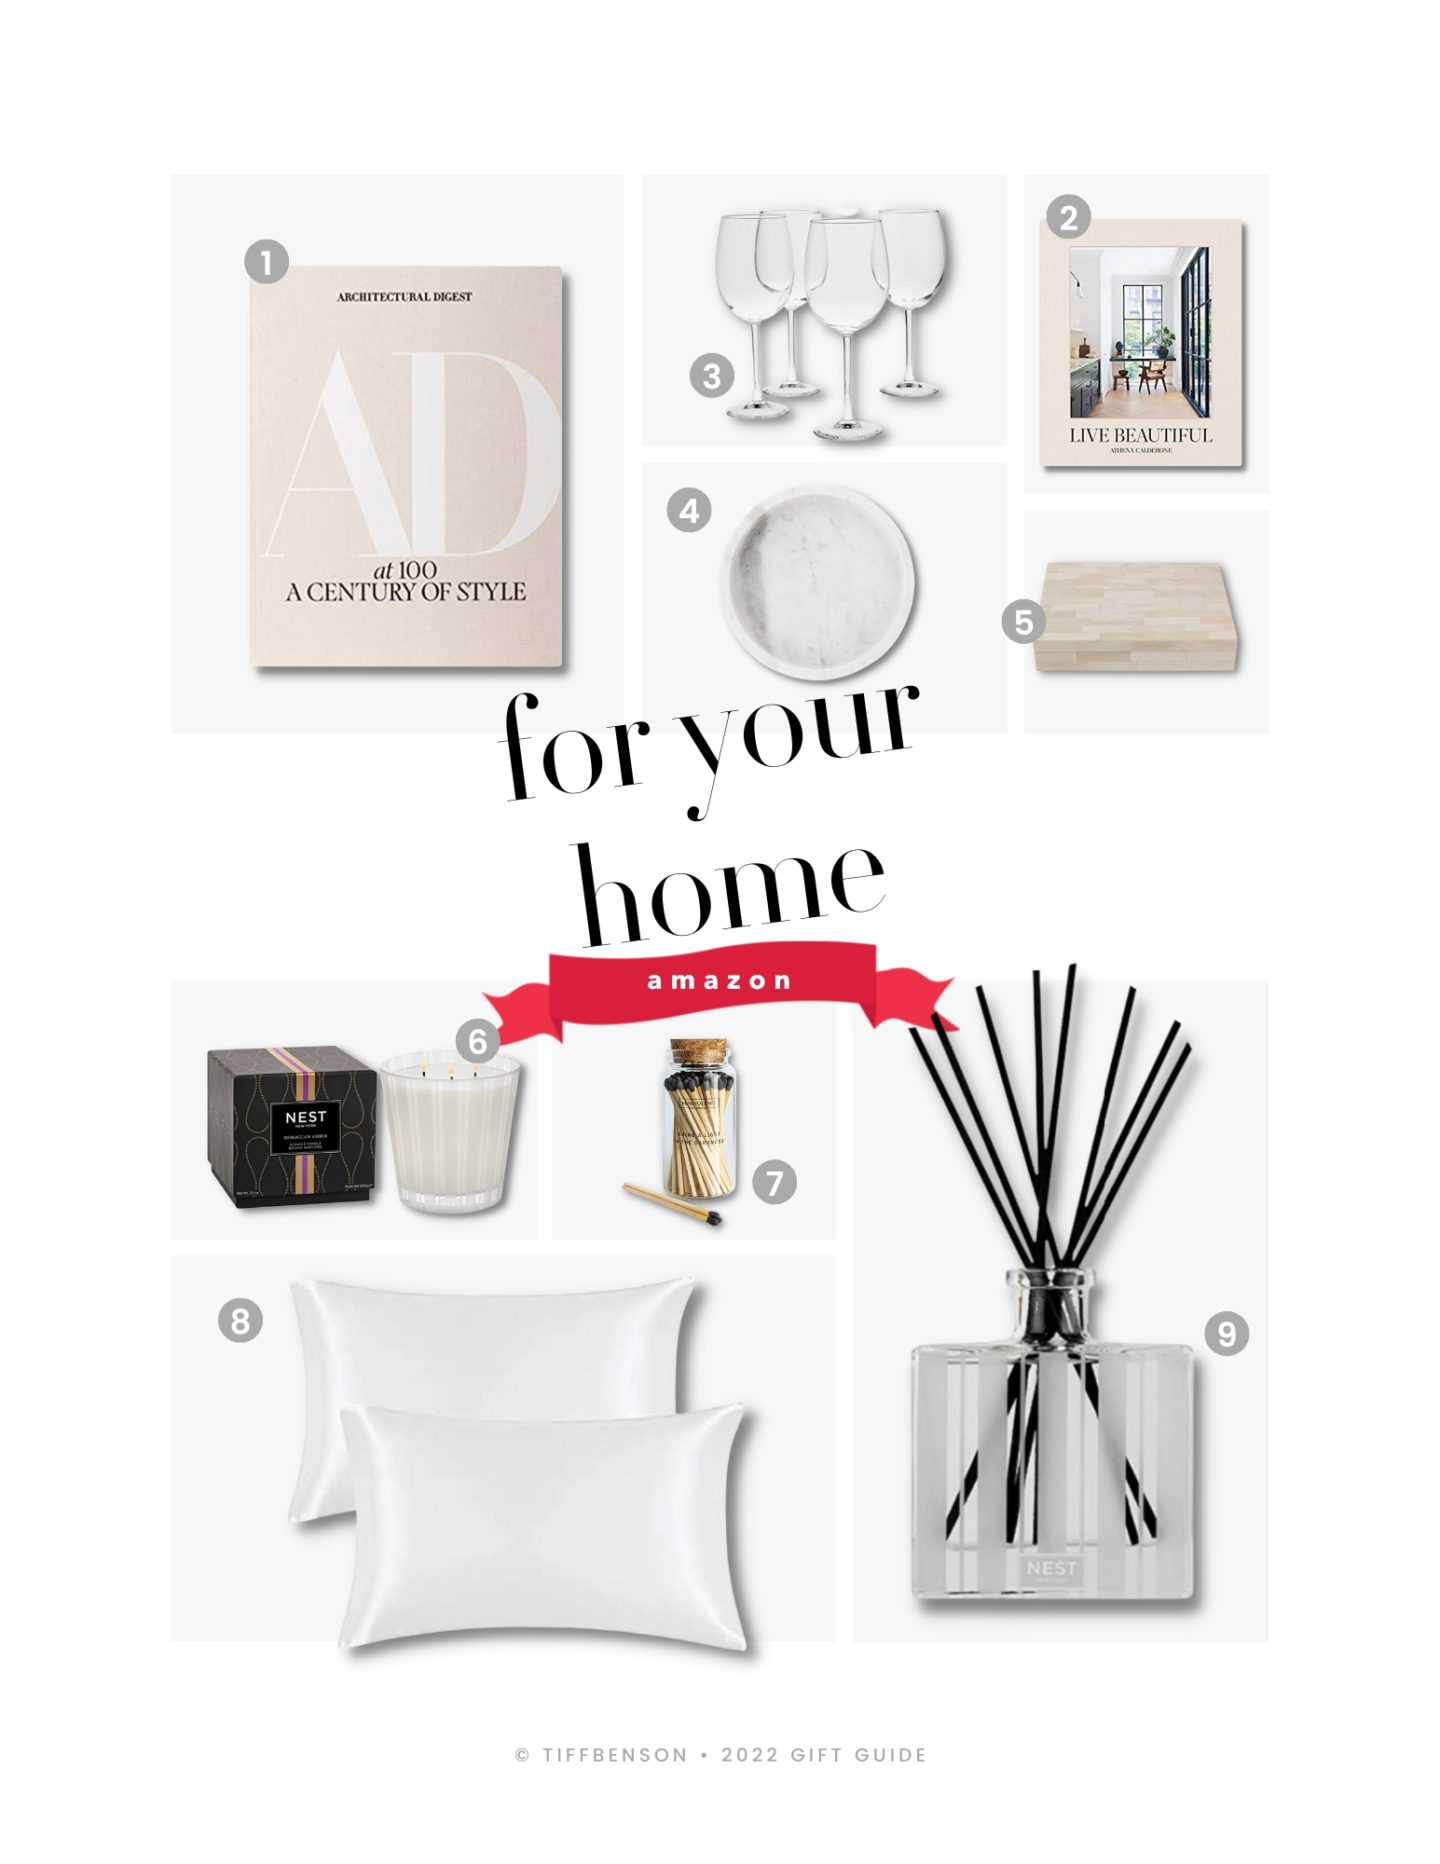 Gift Guides for home at Amazon, home products from amazon